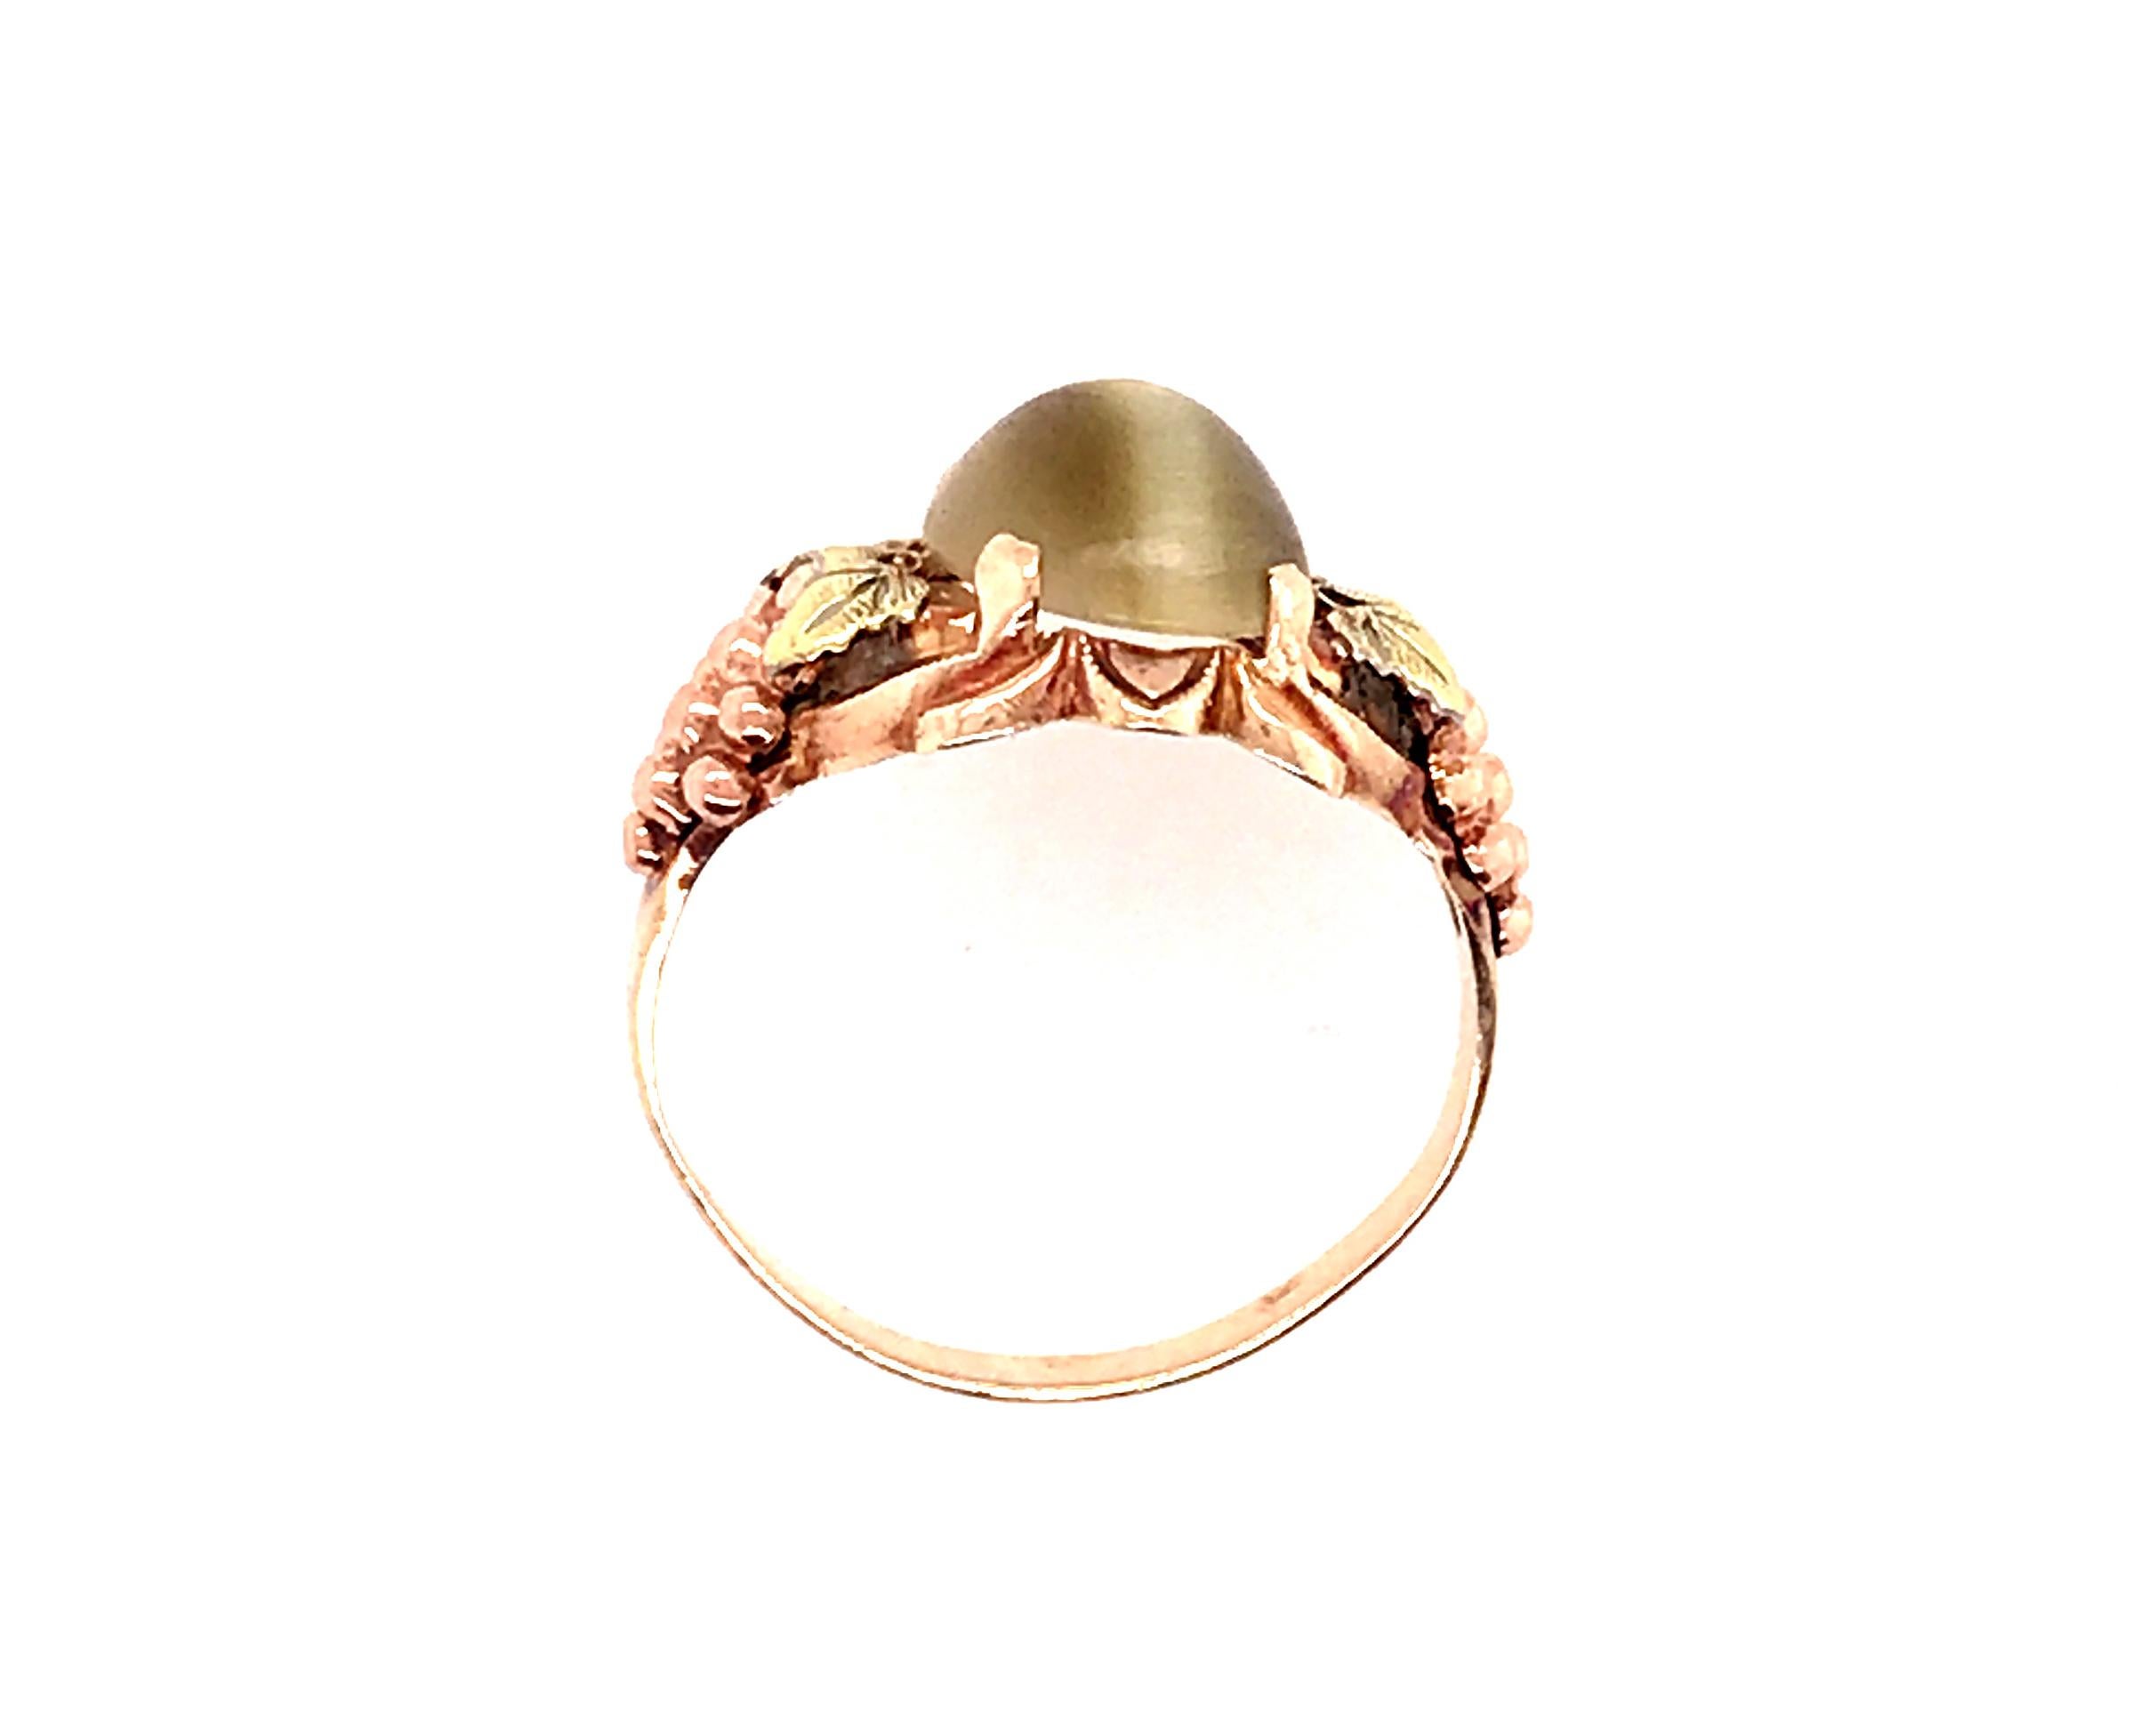 Vintage Antique 2.21ct Art Deco Tiger's Eye Yellow, Pink & Green Gold Cocktail  Ring



Features a 2.21ct Genuine Natural Tiger's Eye Gemstone

Solid 10K Yellow Gold with Pink & Green Gold Accents

Unique One of a Kind Piece 

Hand Carved Grape on